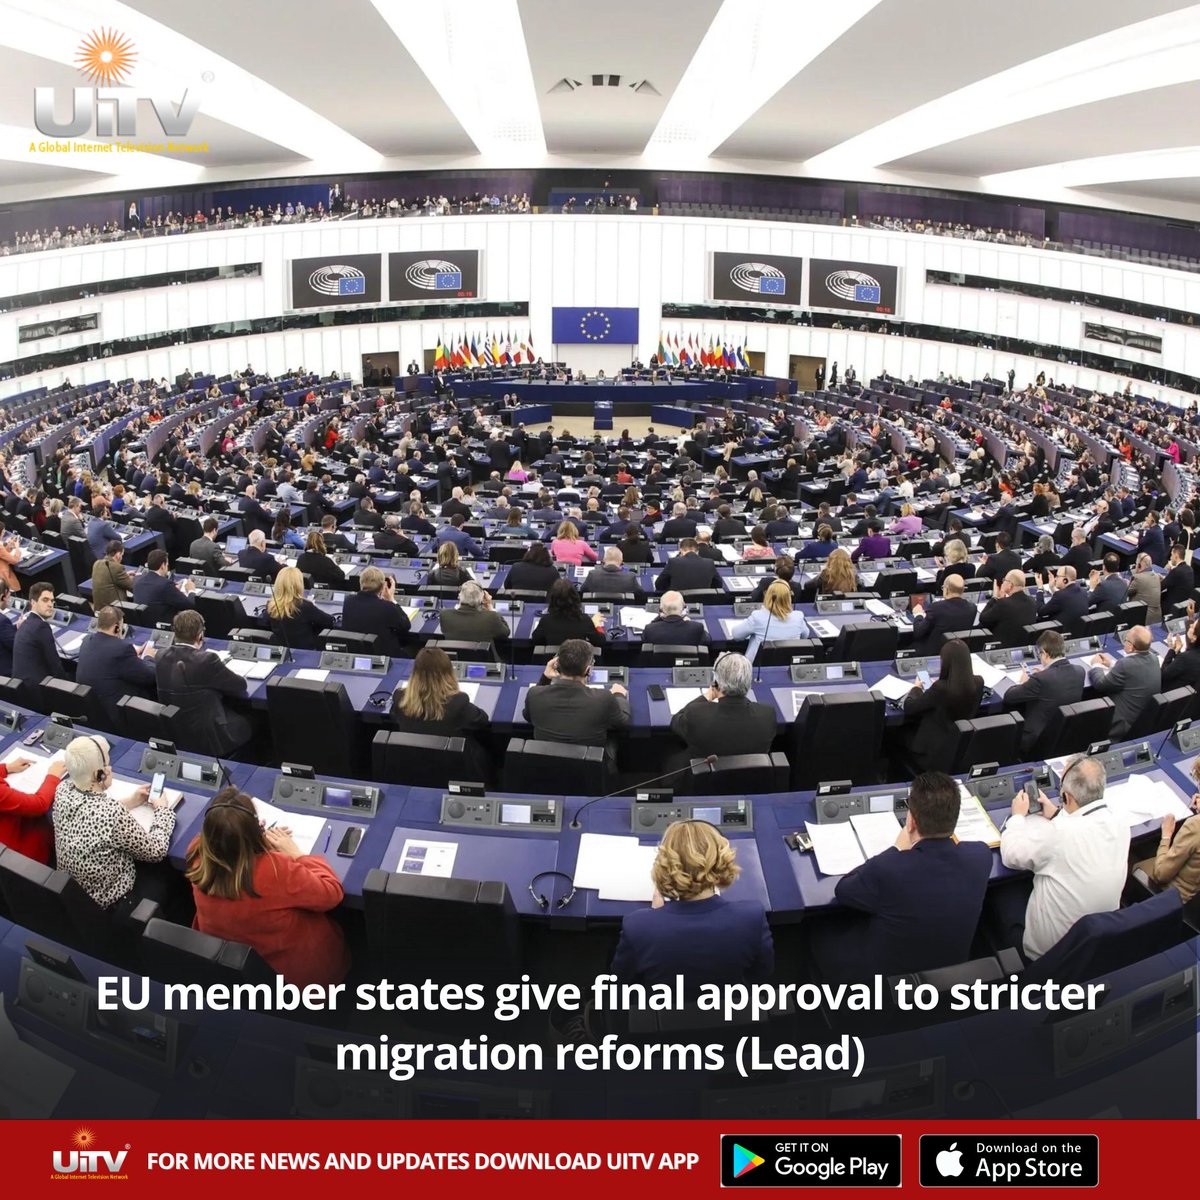 Big news! EU member states have just given their final approval to stricter migration reforms. This decision will have significant impacts on migration policies across the region. #EU #MigrationReforms #migration